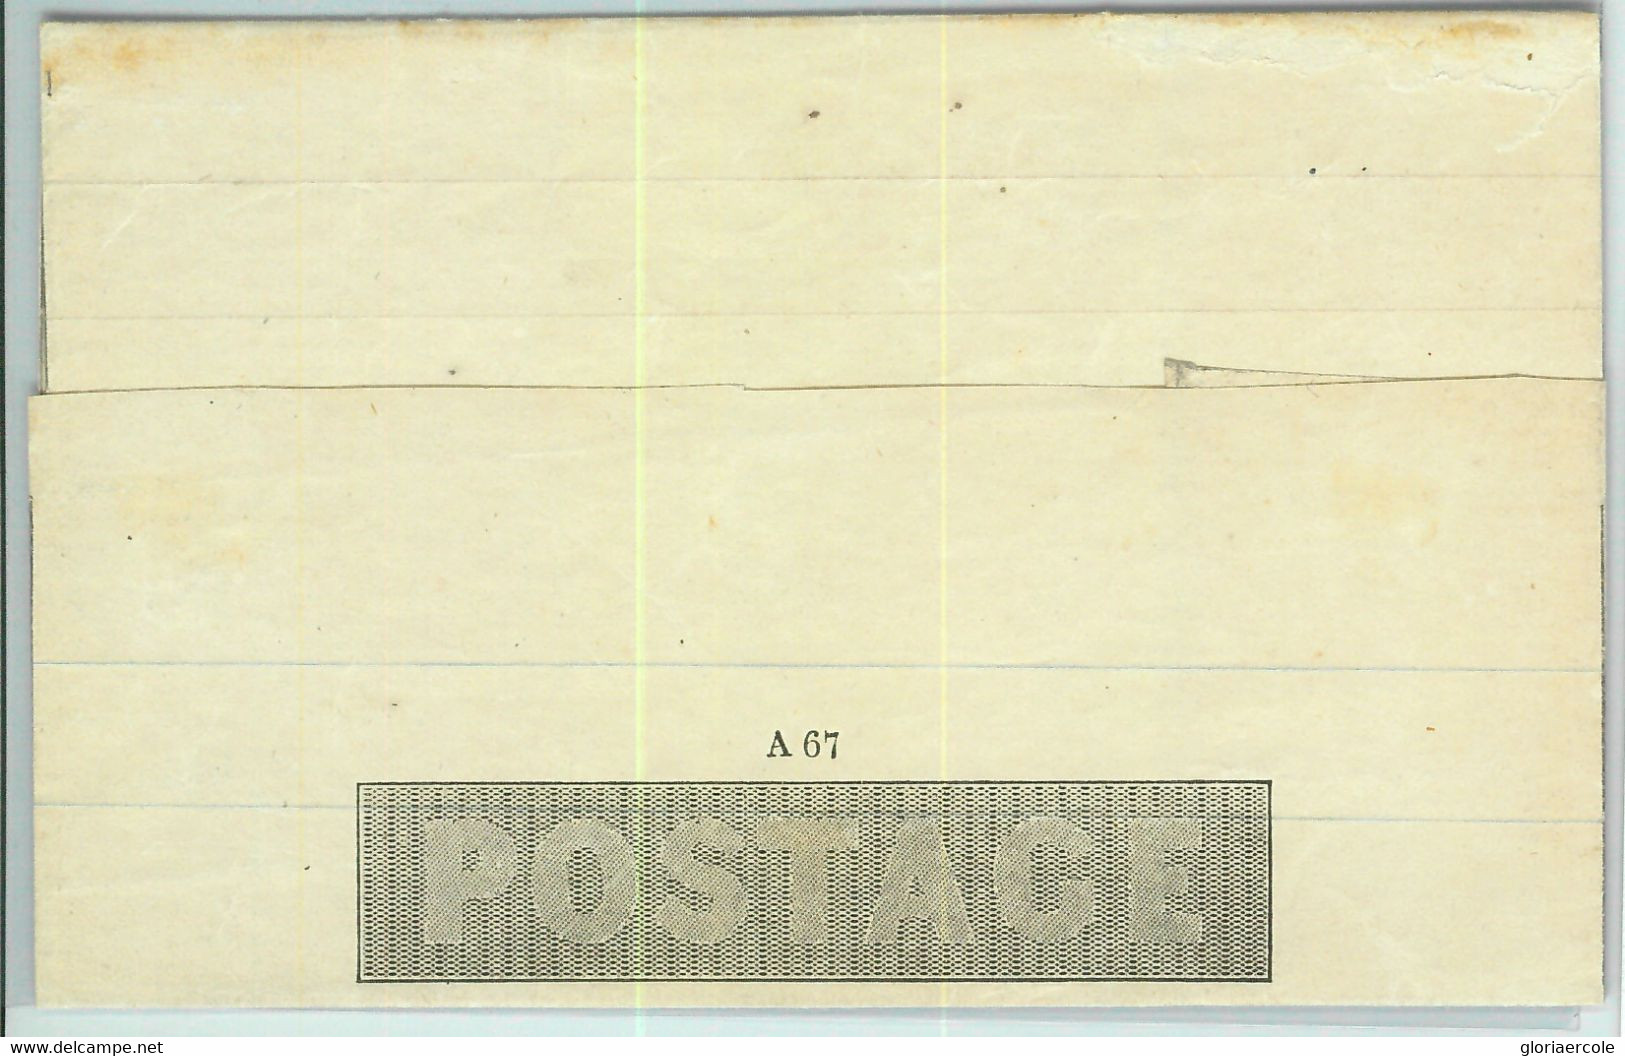 BK0674 - GB Great Brittain - POSTAL HISTORY - MULREADY Letter  # A67 - LIONS - 1840 Mulready Envelopes & Lettersheets